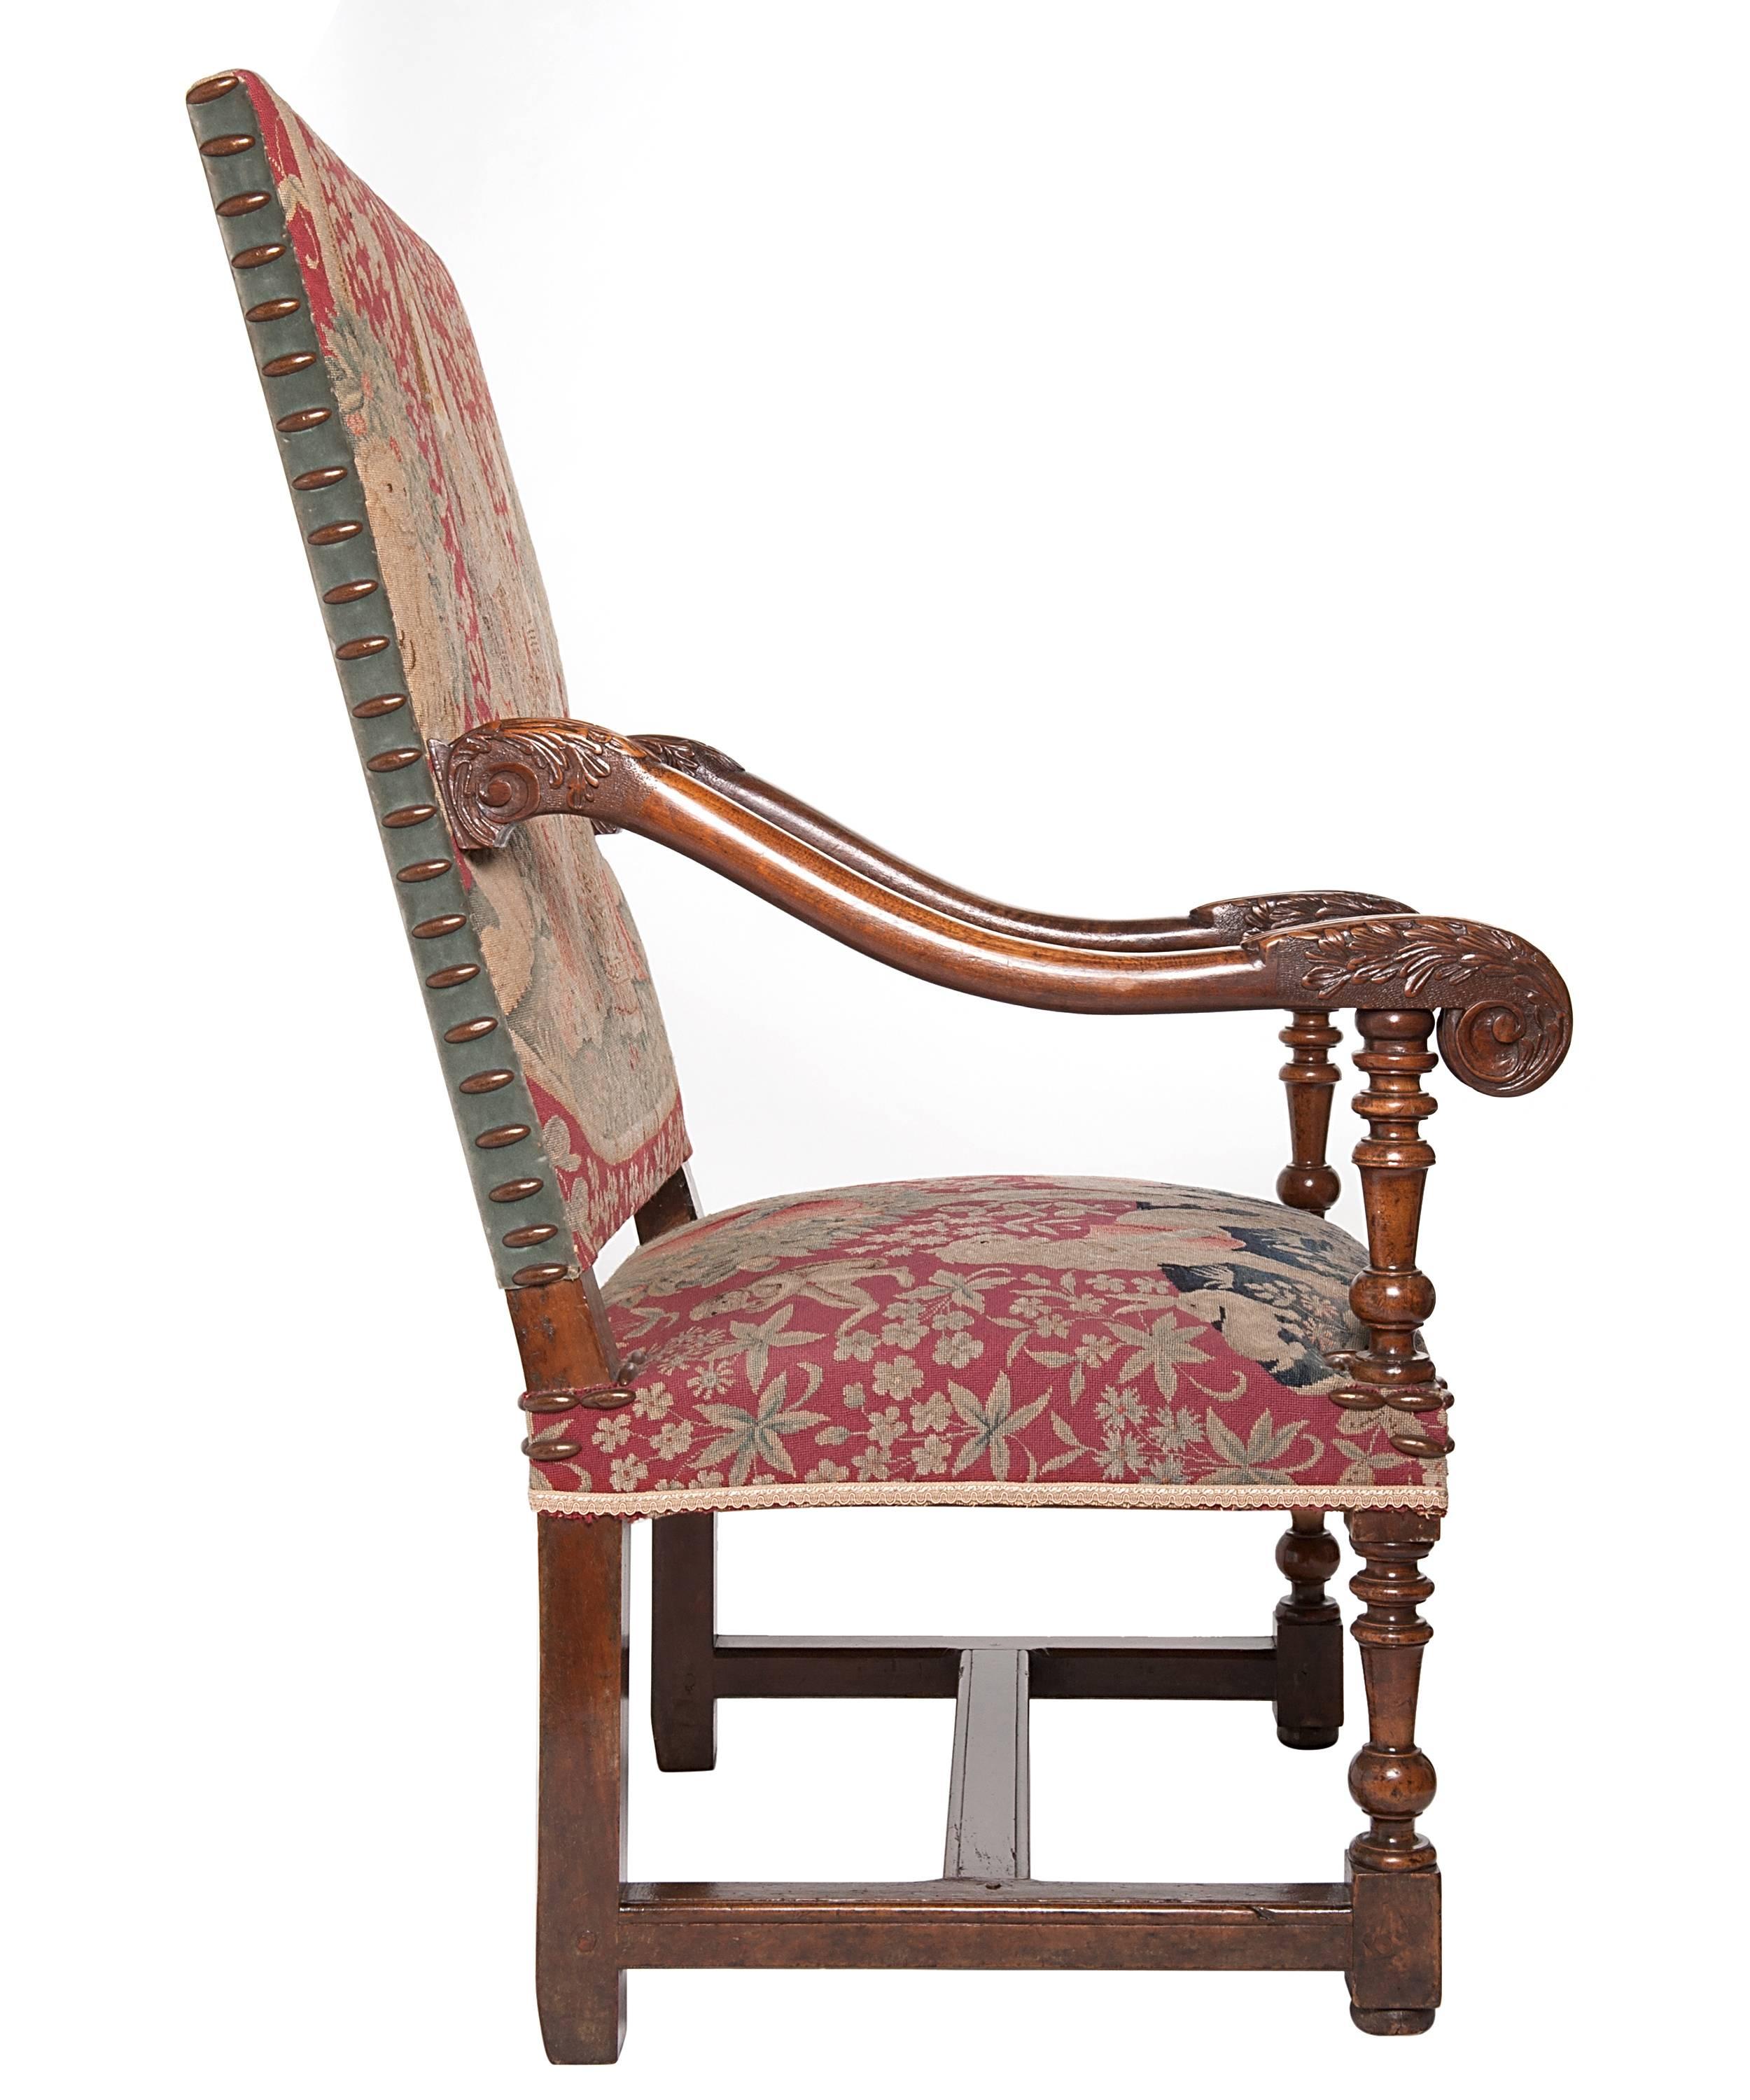 A very good large walnut armchair with slightly slanted rectangular backrest and padded seat. With floral carved scrolled arms finishing in 'bec de corbin'. On block and spooled turned legs linked by a 'H' shaped stretcher. The chair upholstered in